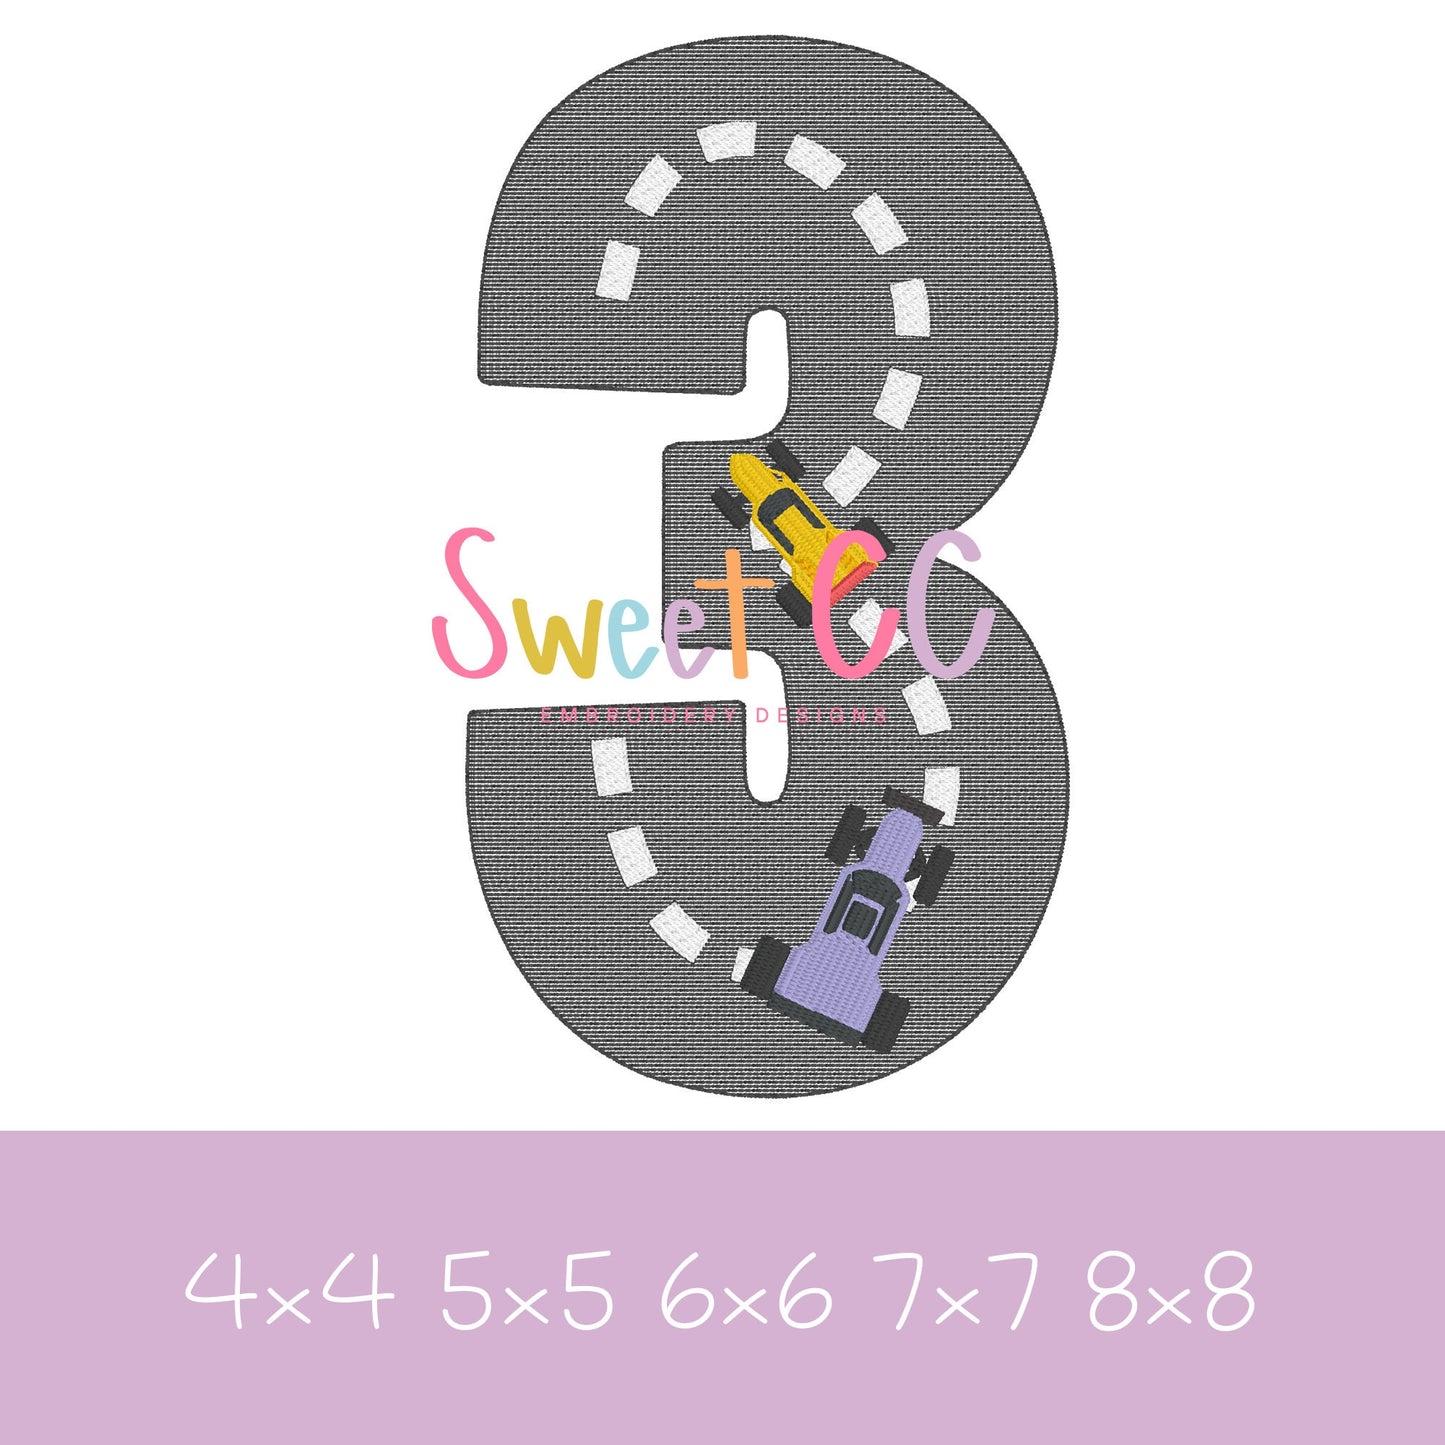 Build Your own Race Track Sketch Stitch Numbers 0-9 with Mini Fill Cars Embroidery Design 4x4, 5x5, 6x6, 7x7, 8x8 1, 2, 3, 4, 5, 6, 7, 8,